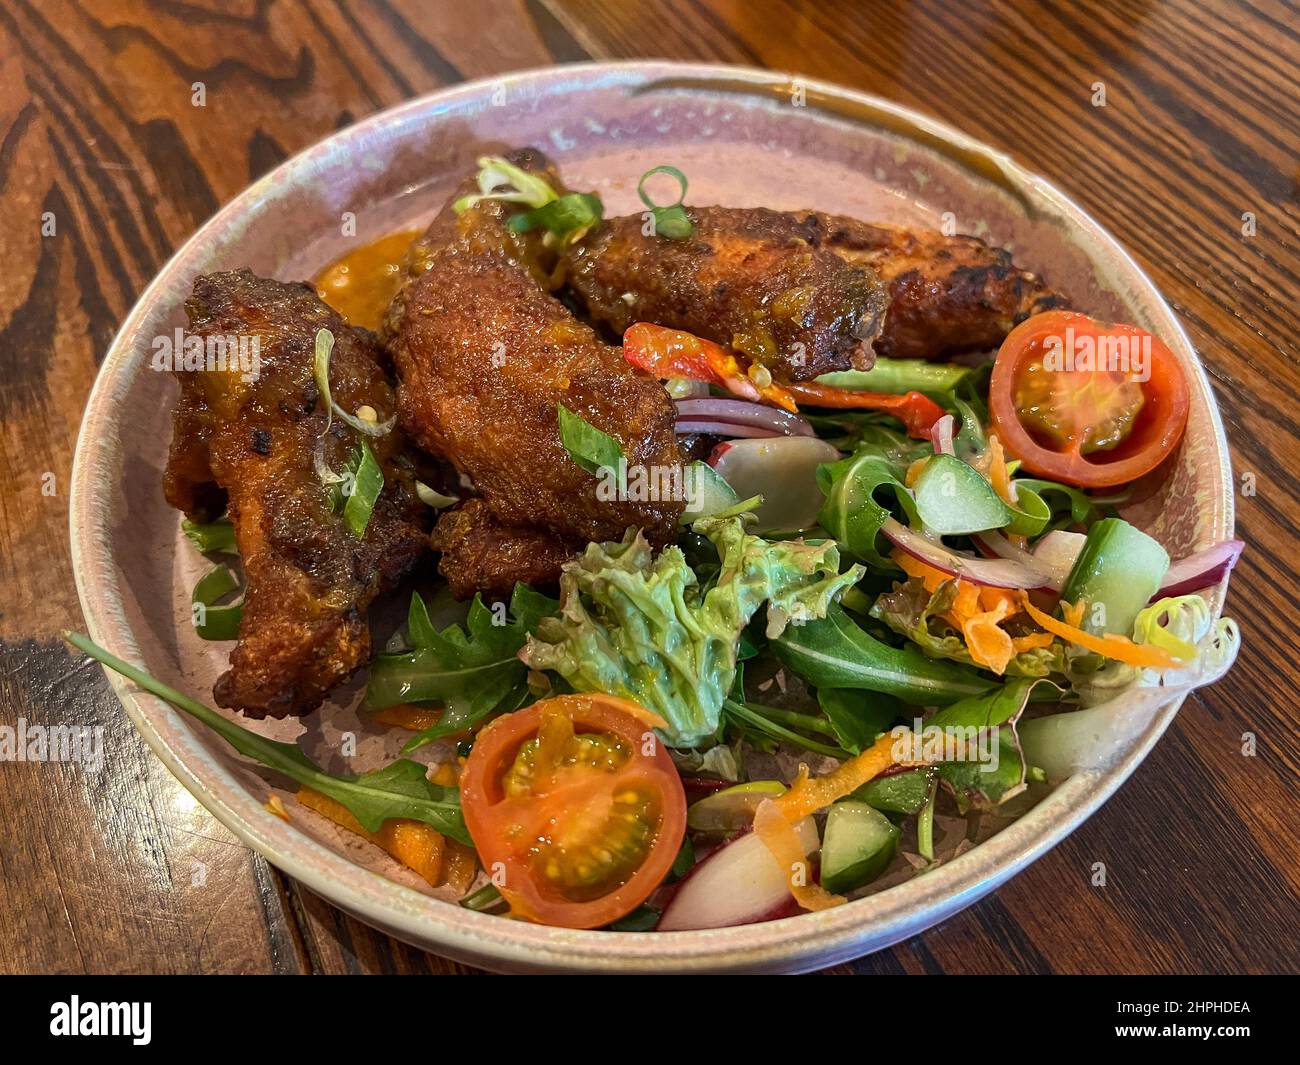 Barbecue chicken wings with salad appetiser Stock Photo